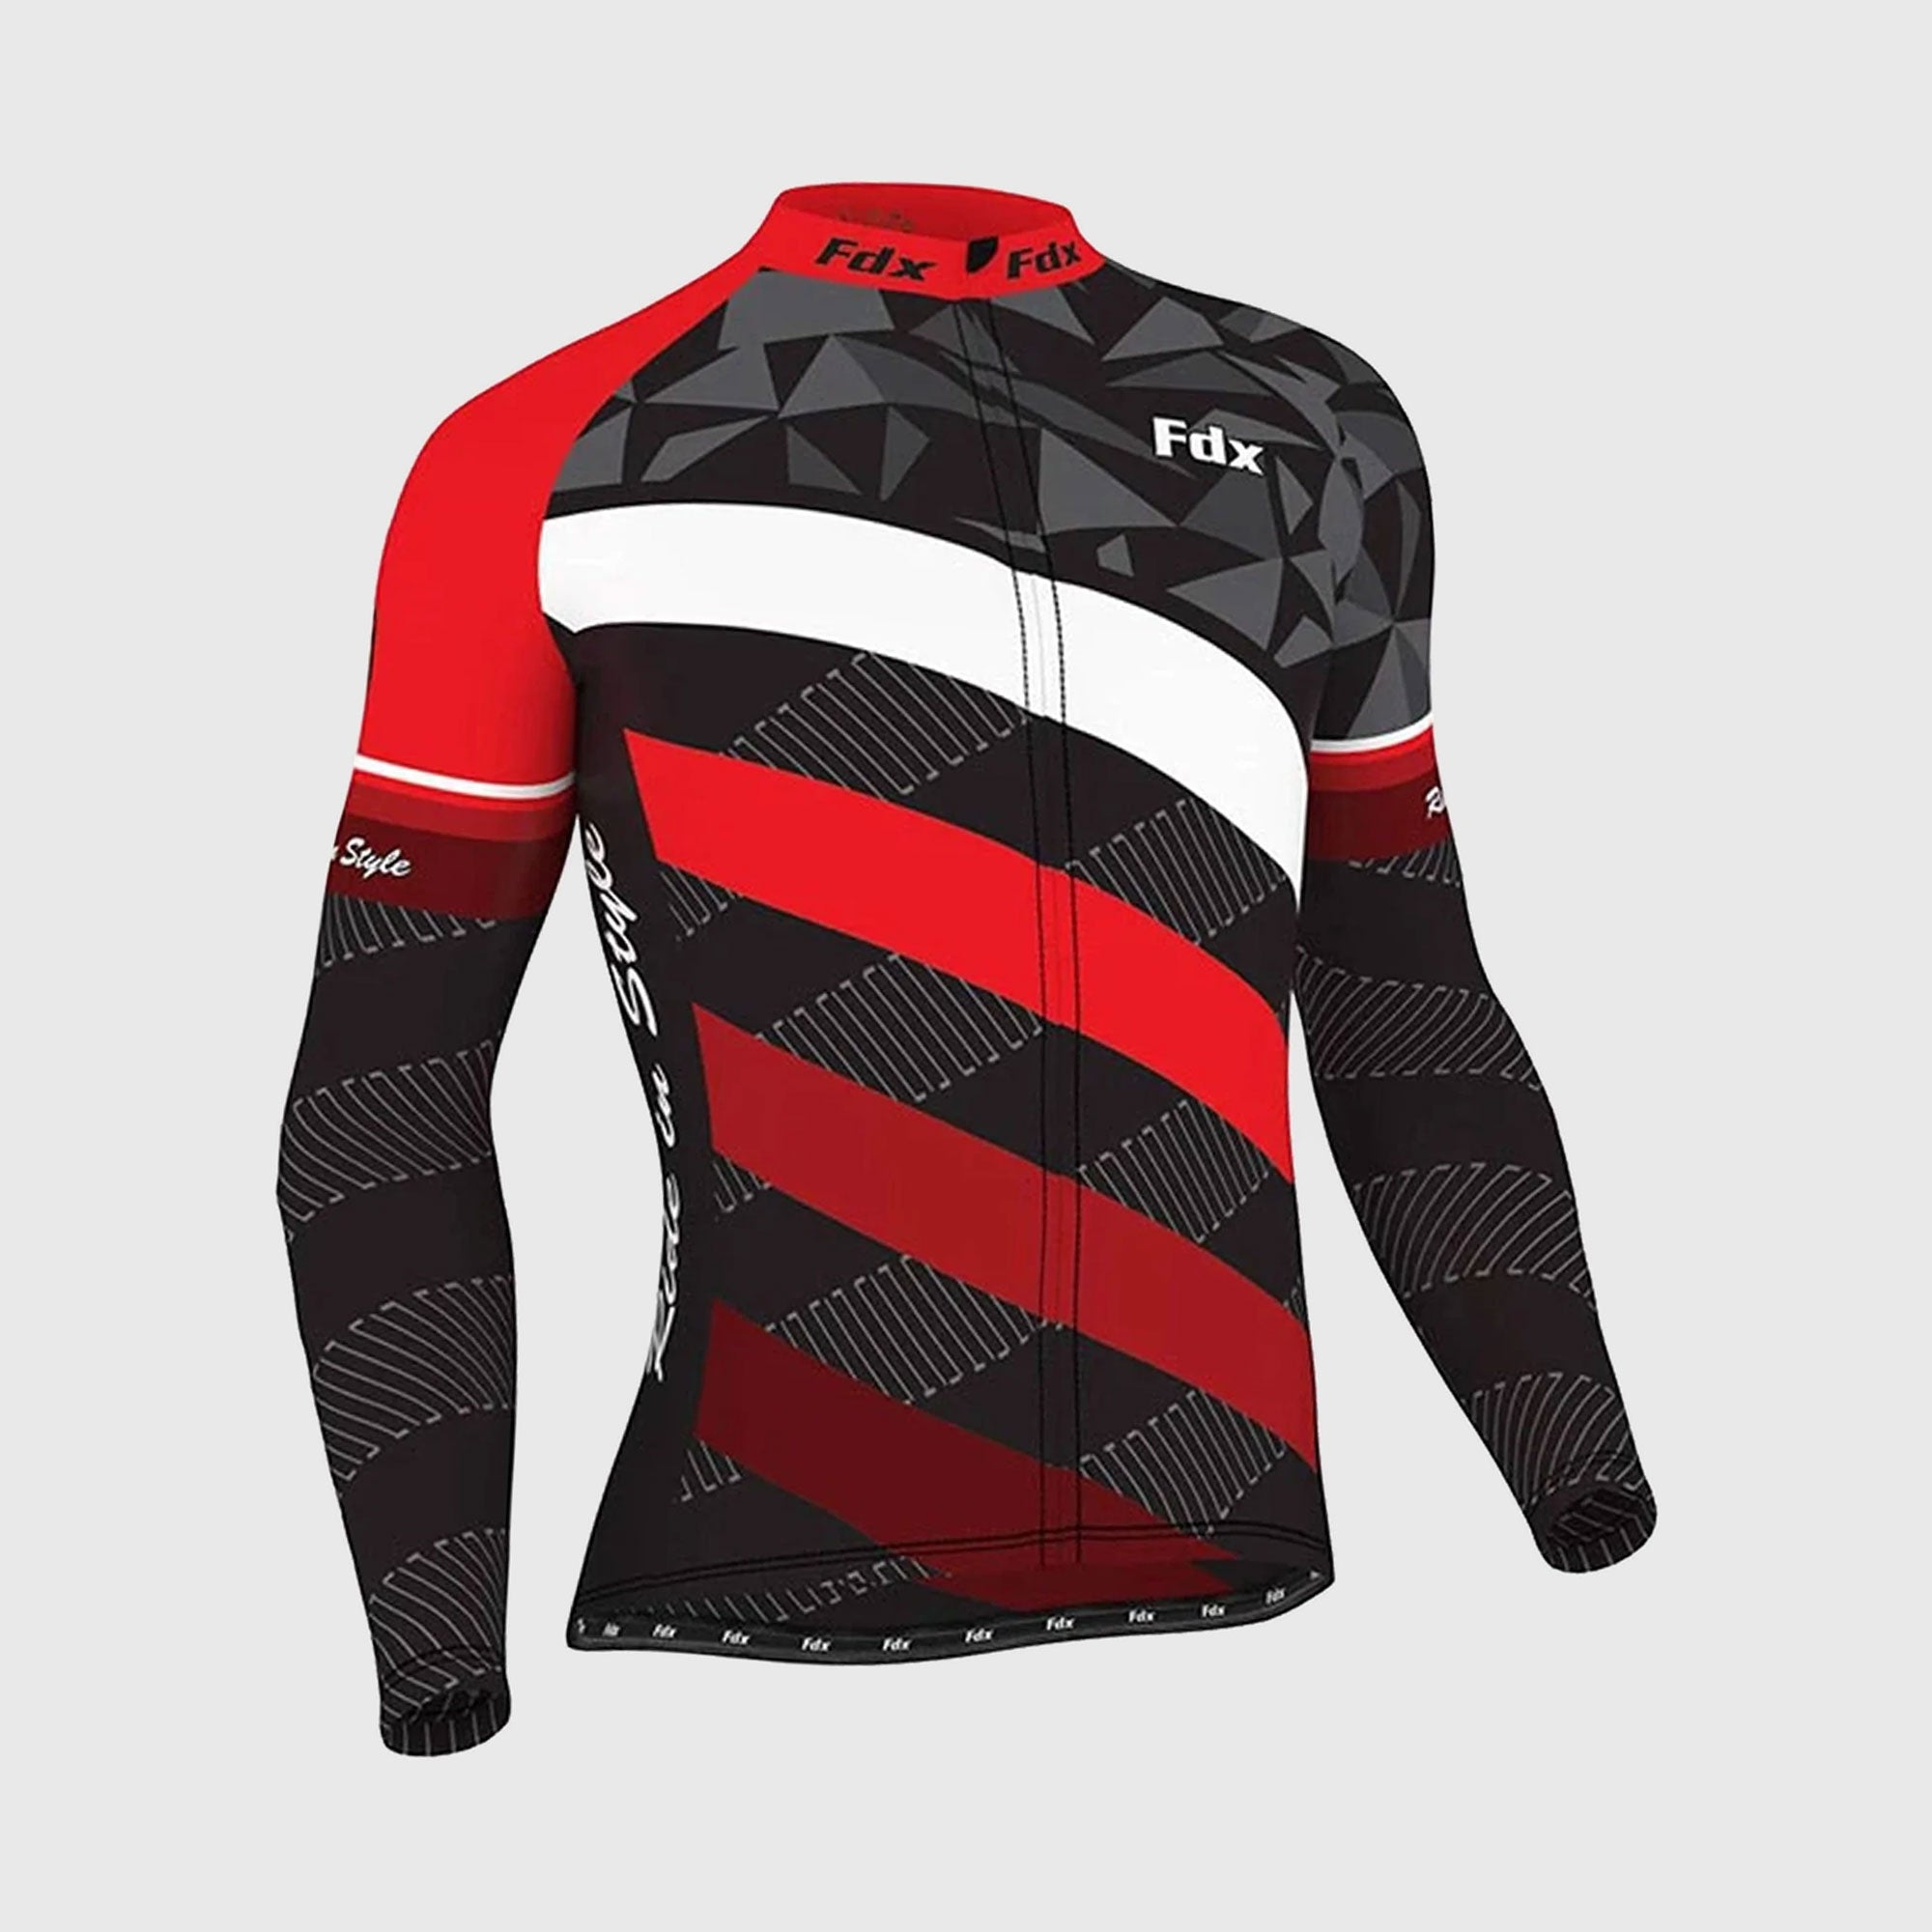 Fdx Equin Men's Red Thermal Roubaix Long Sleeve Cycling Jersey